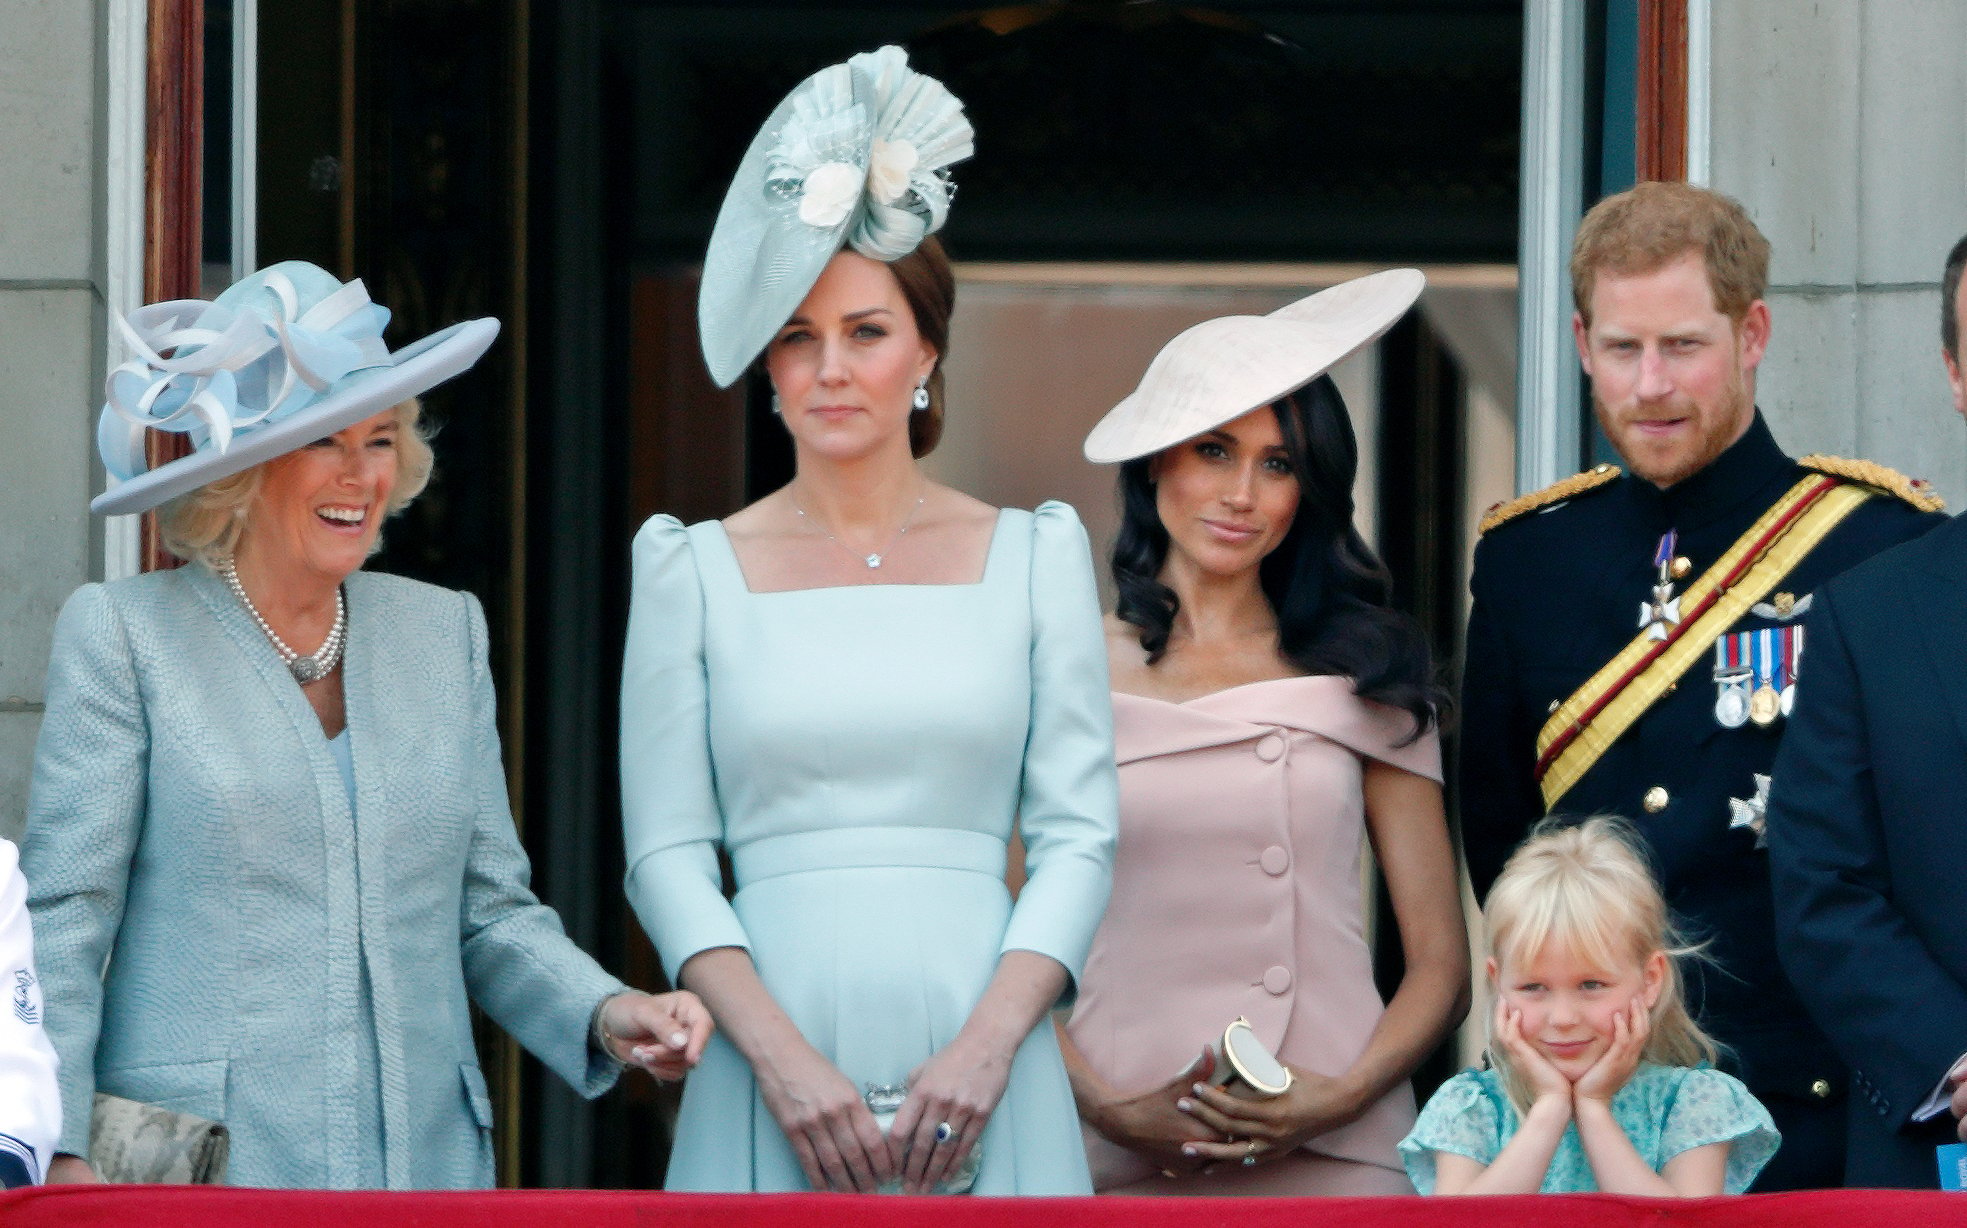 Members of the royal family who have photos out there they wish you didn't see standing in the Buckingham Palace balcony